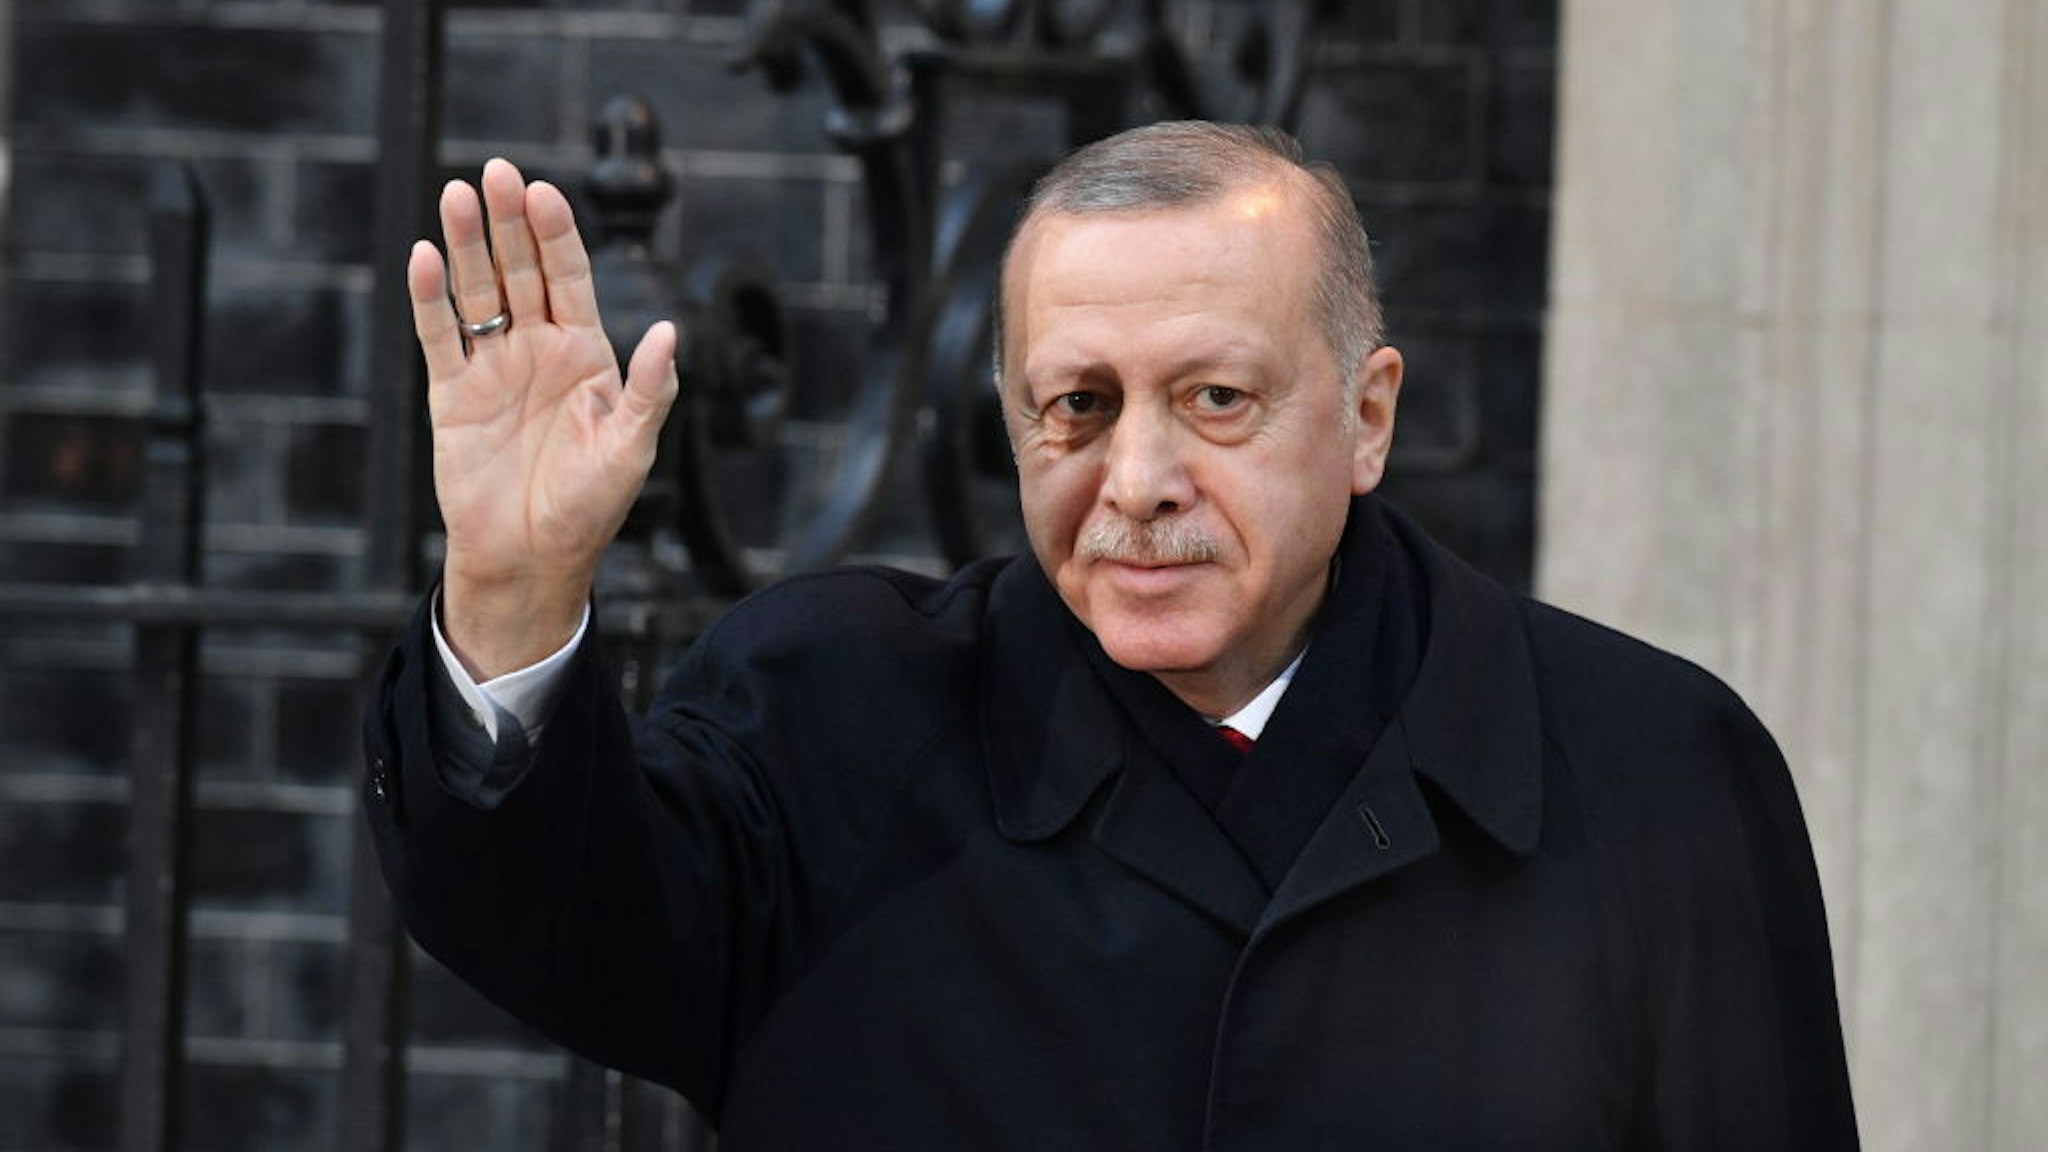 LONDON, ENGLAND - DECEMBER 03: President of Turkey, Recep Tayyip Erdogan arrives for a meeting with Prime Minister Boris Johnson at number 10 Downing Street on December 3, 2019 in London, England. France and the UK signed the Treaty of Dunkirk in 1947 in the aftermath of WW2 cementing a mutual alliance in the event of an attack by Germany or the Soviet Union. The Benelux countries joined the Treaty and in April 1949 expanded further to include North America and Canada followed by Portugal, Italy, Norway, Denmark and Iceland. This new military alliance became the North Atlantic Treaty Organisation (NATO). The organisation grew with Greece and Turkey becoming members and a re-armed West Germany was permitted in 1955. This encouraged the creation of the Soviet-led Warsaw Pact delineating the two sides of the Cold War. This year marks the 70th anniversary of NATO.